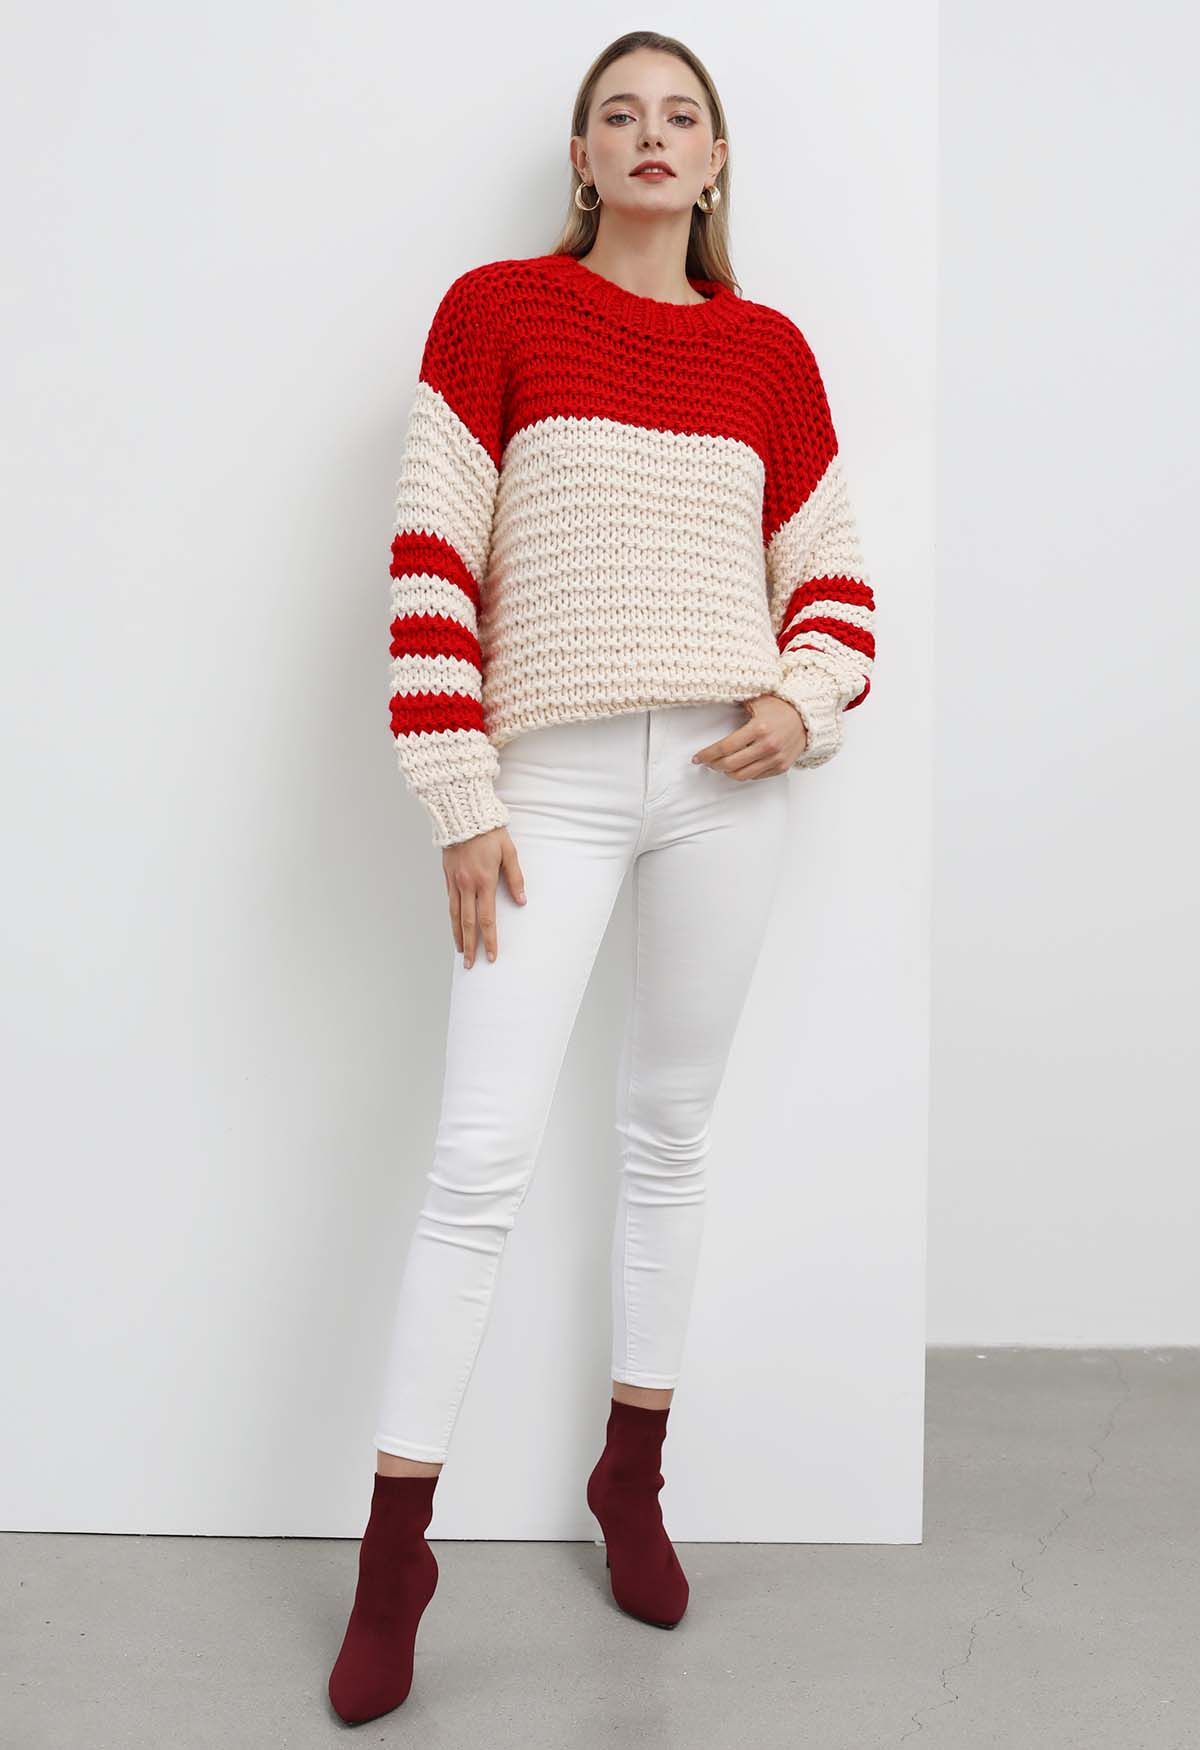 Two-Tone Striped Sleeves Chunky Hand Knit Sweater in Red